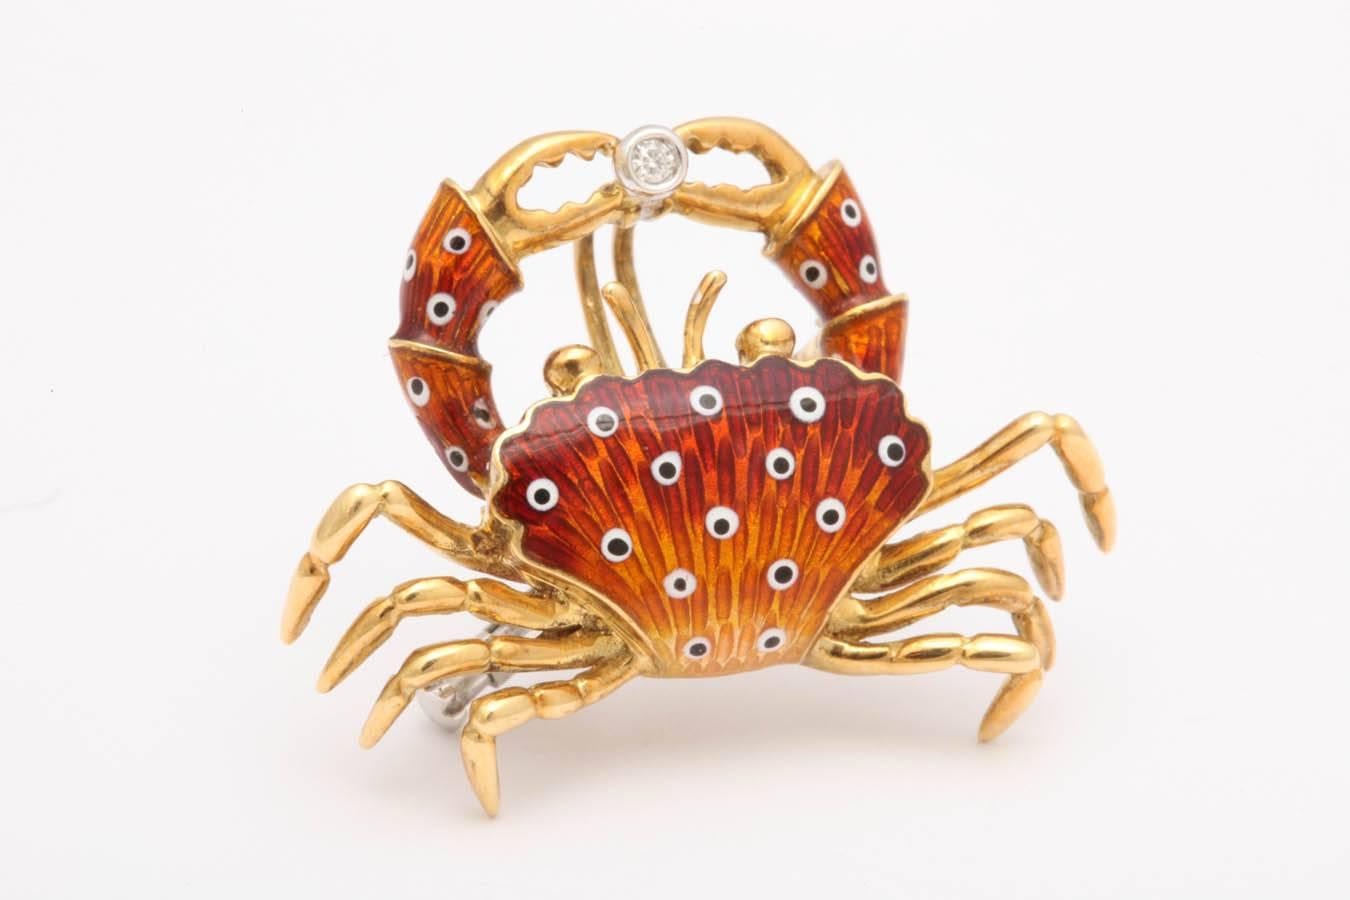 This lovely crab is 18 kt gold and made in Italy. It can be worn as a pin or on a cord, chain, or Omega necklace. The Italians are the best enamelers and have be making enamel jewelry for centuries. The enamel graduates from yellow on the bottom